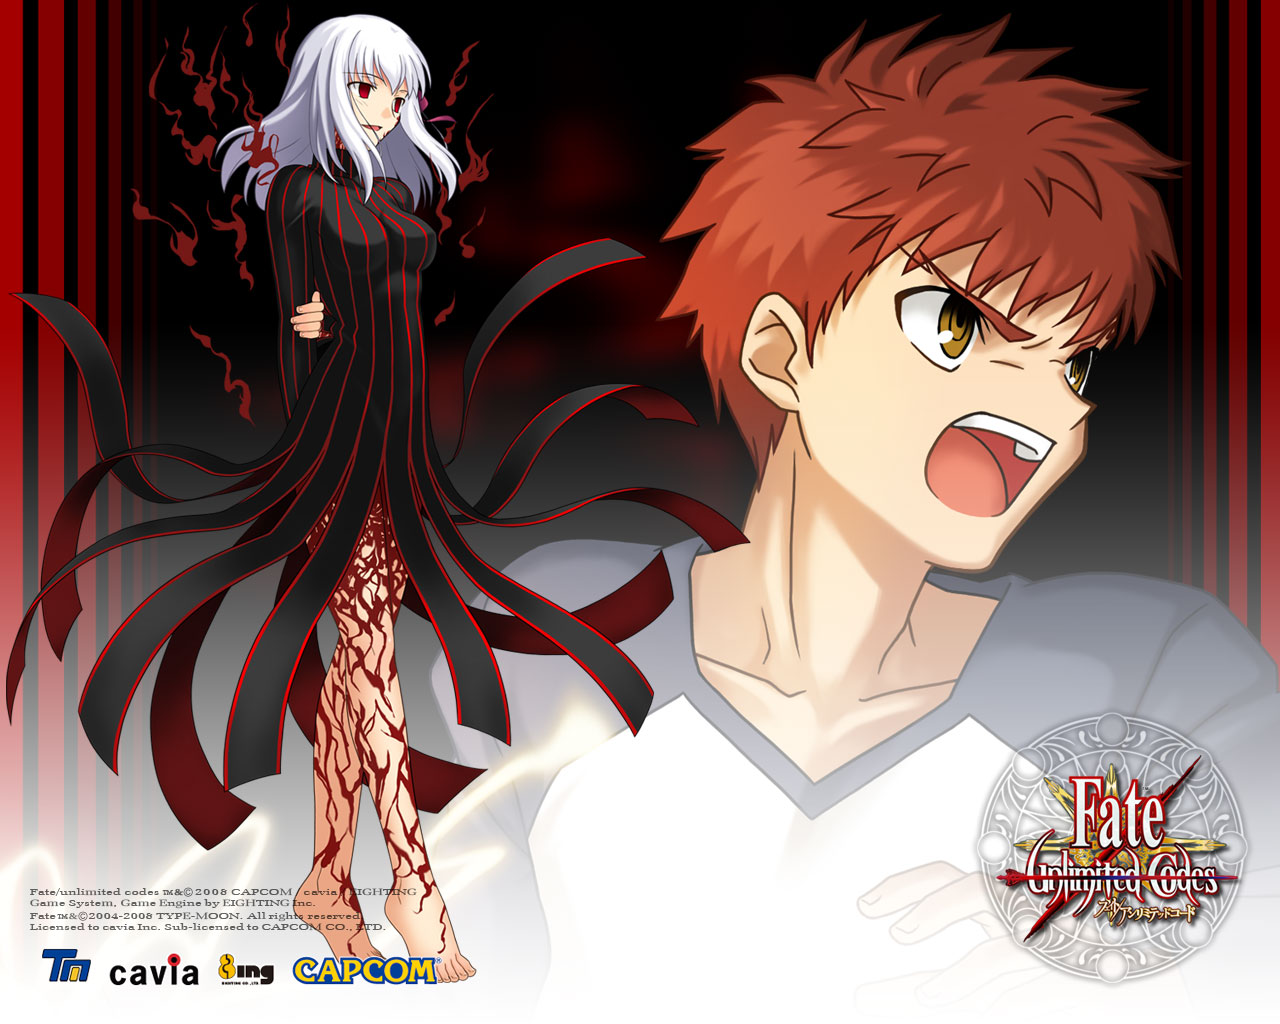 Images of Fate unlimited Codes | 1280x1024